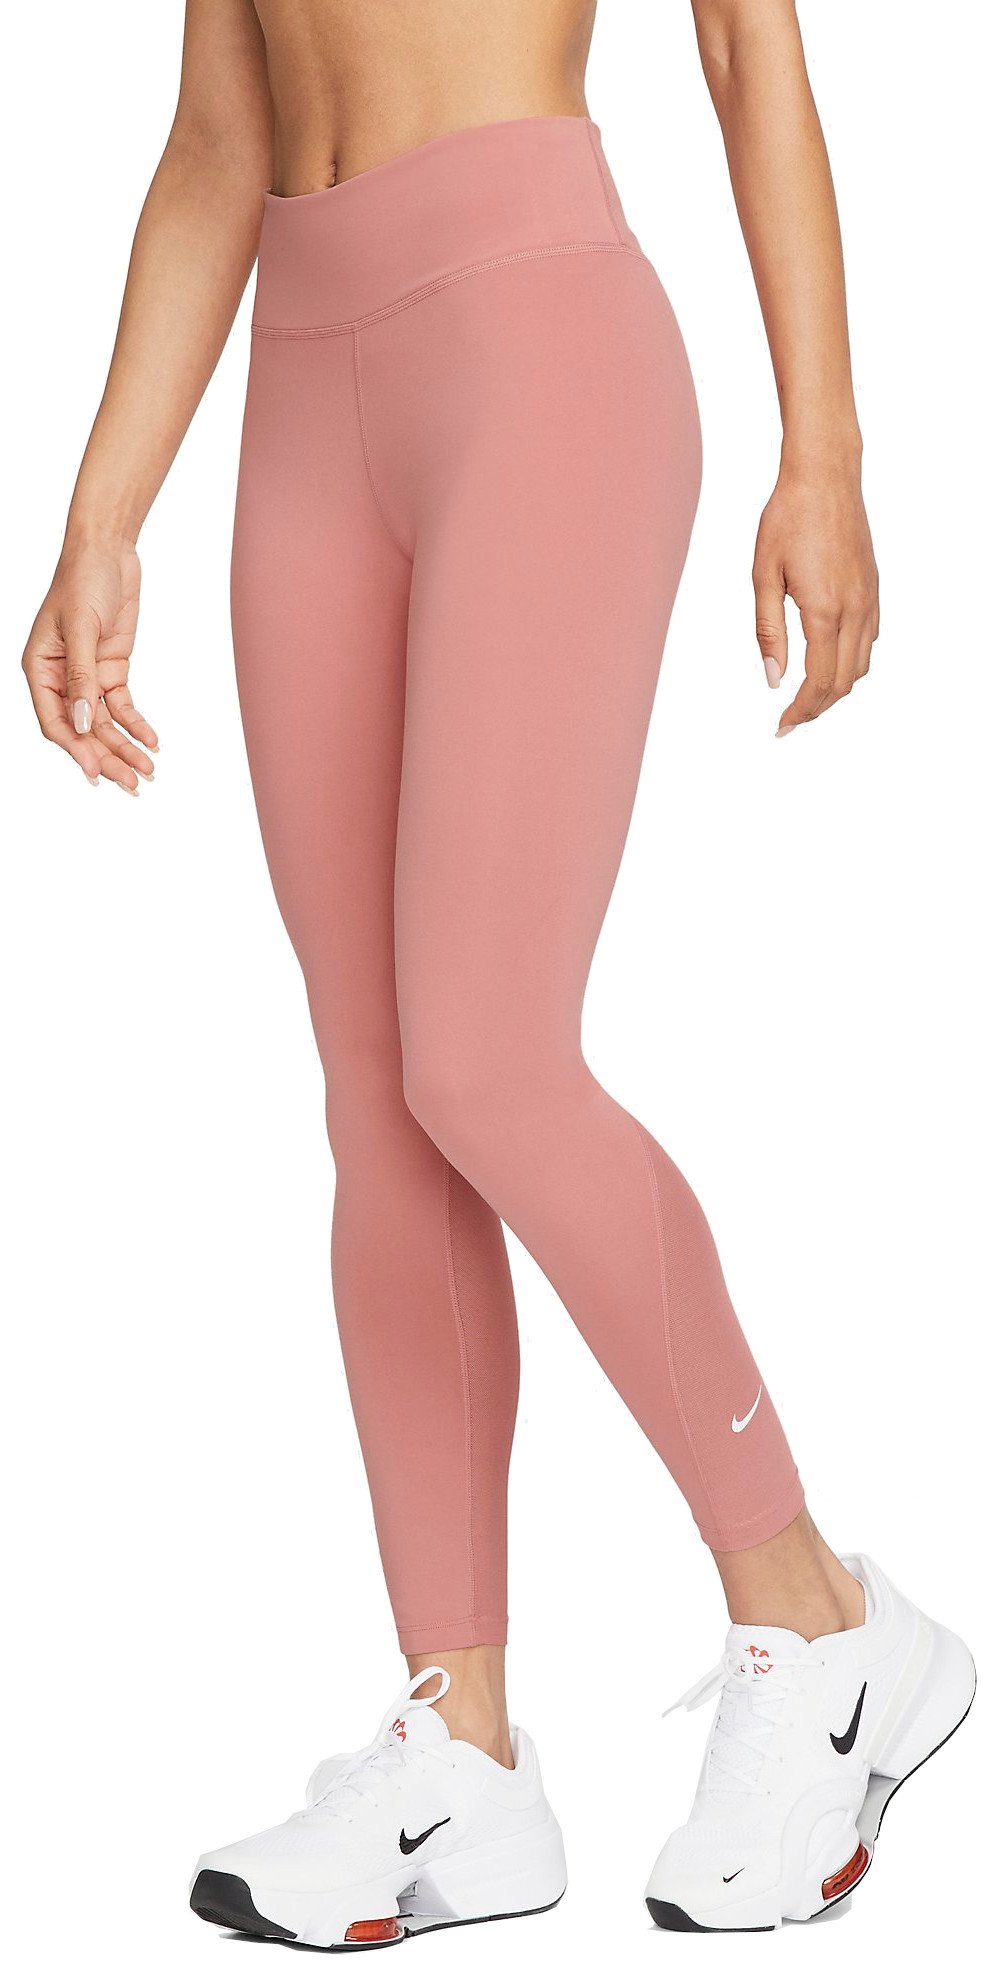 Nike Training One Dri-FIT mid rise leggings in pink